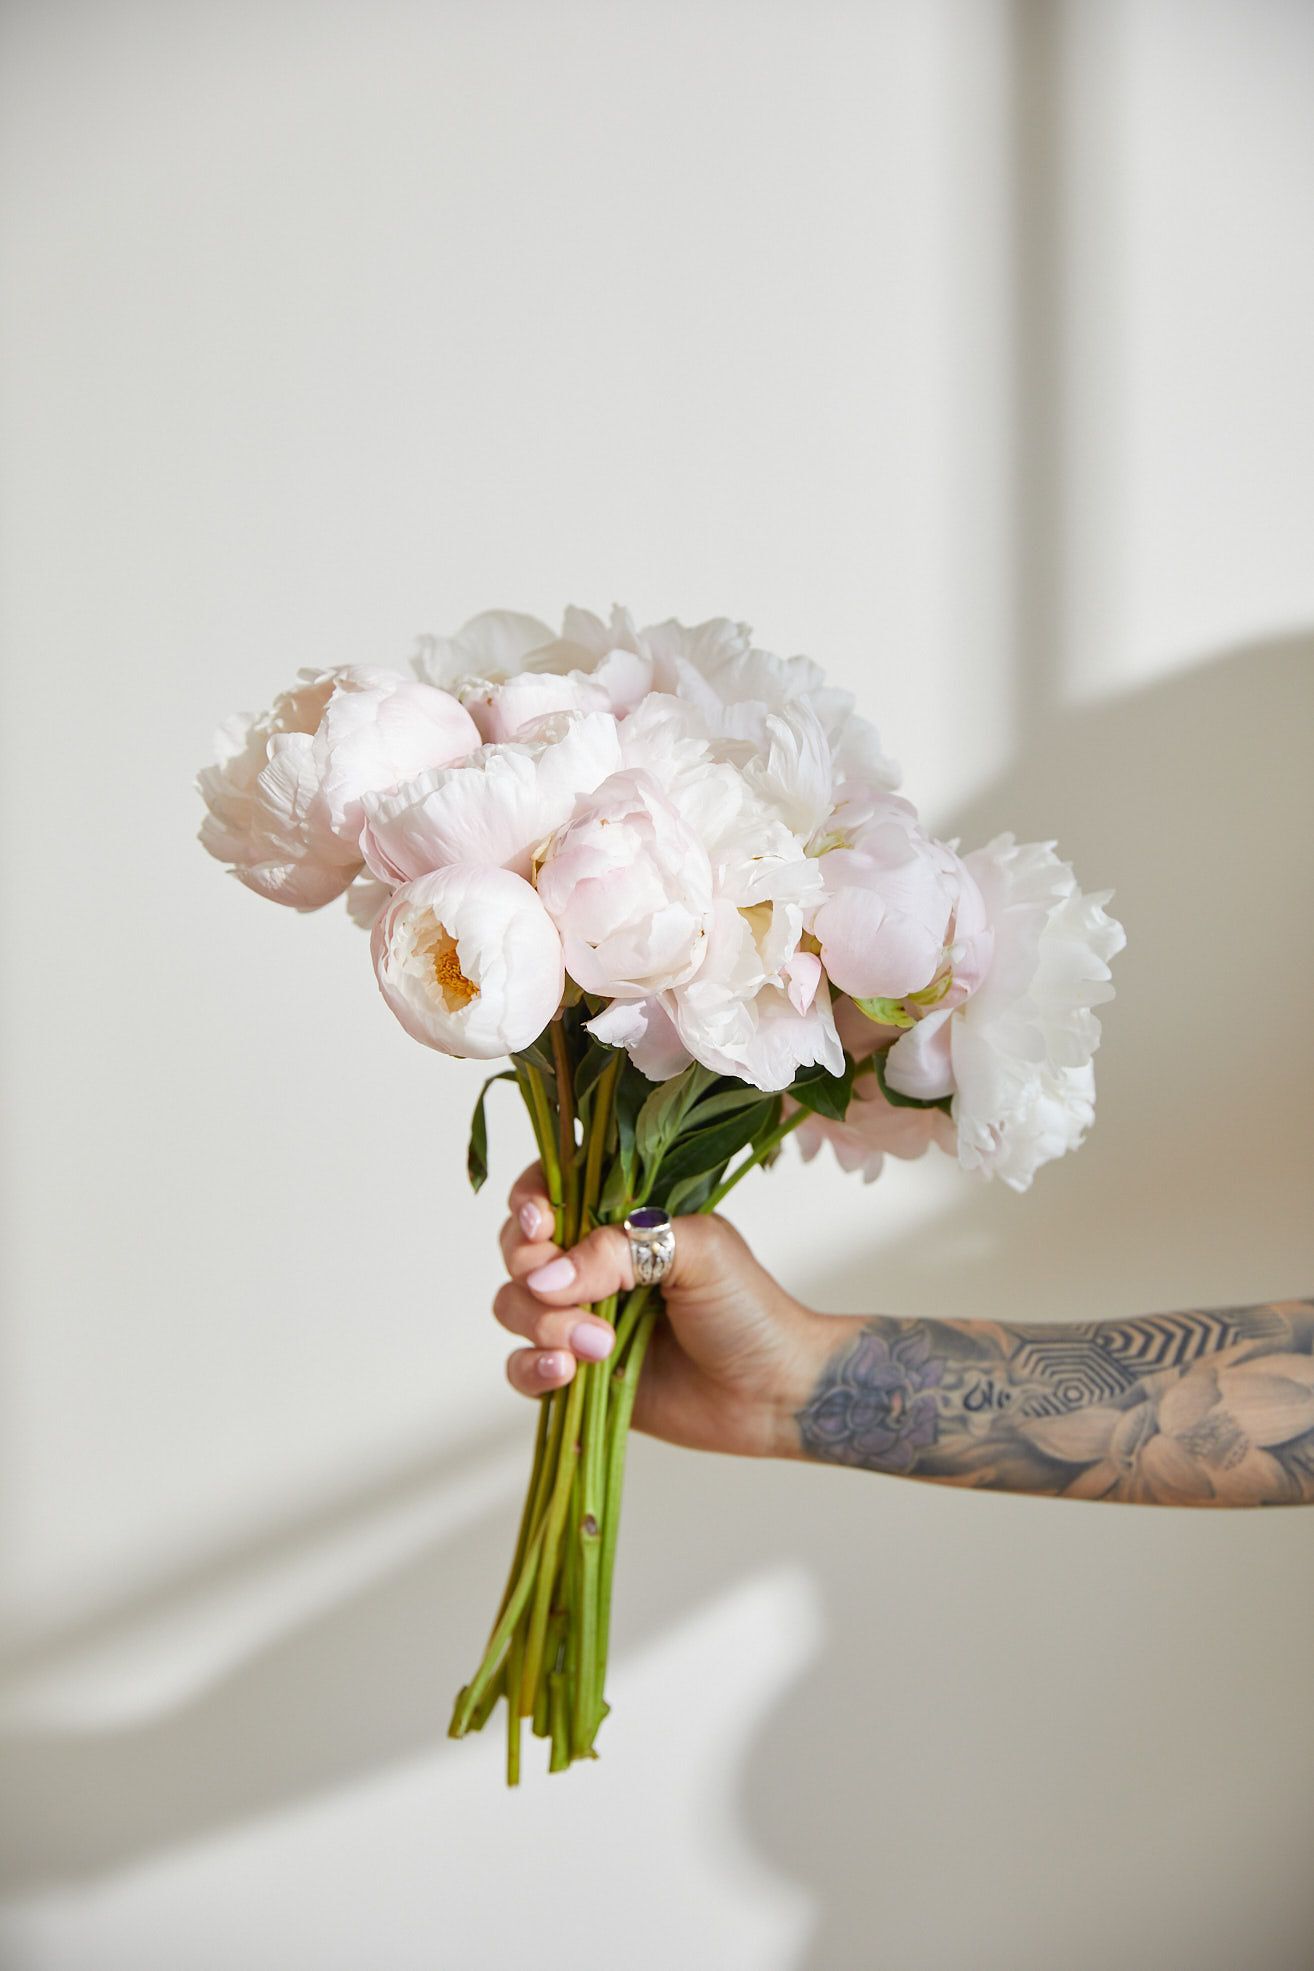 Hand holding bouquet of white peony flowers.